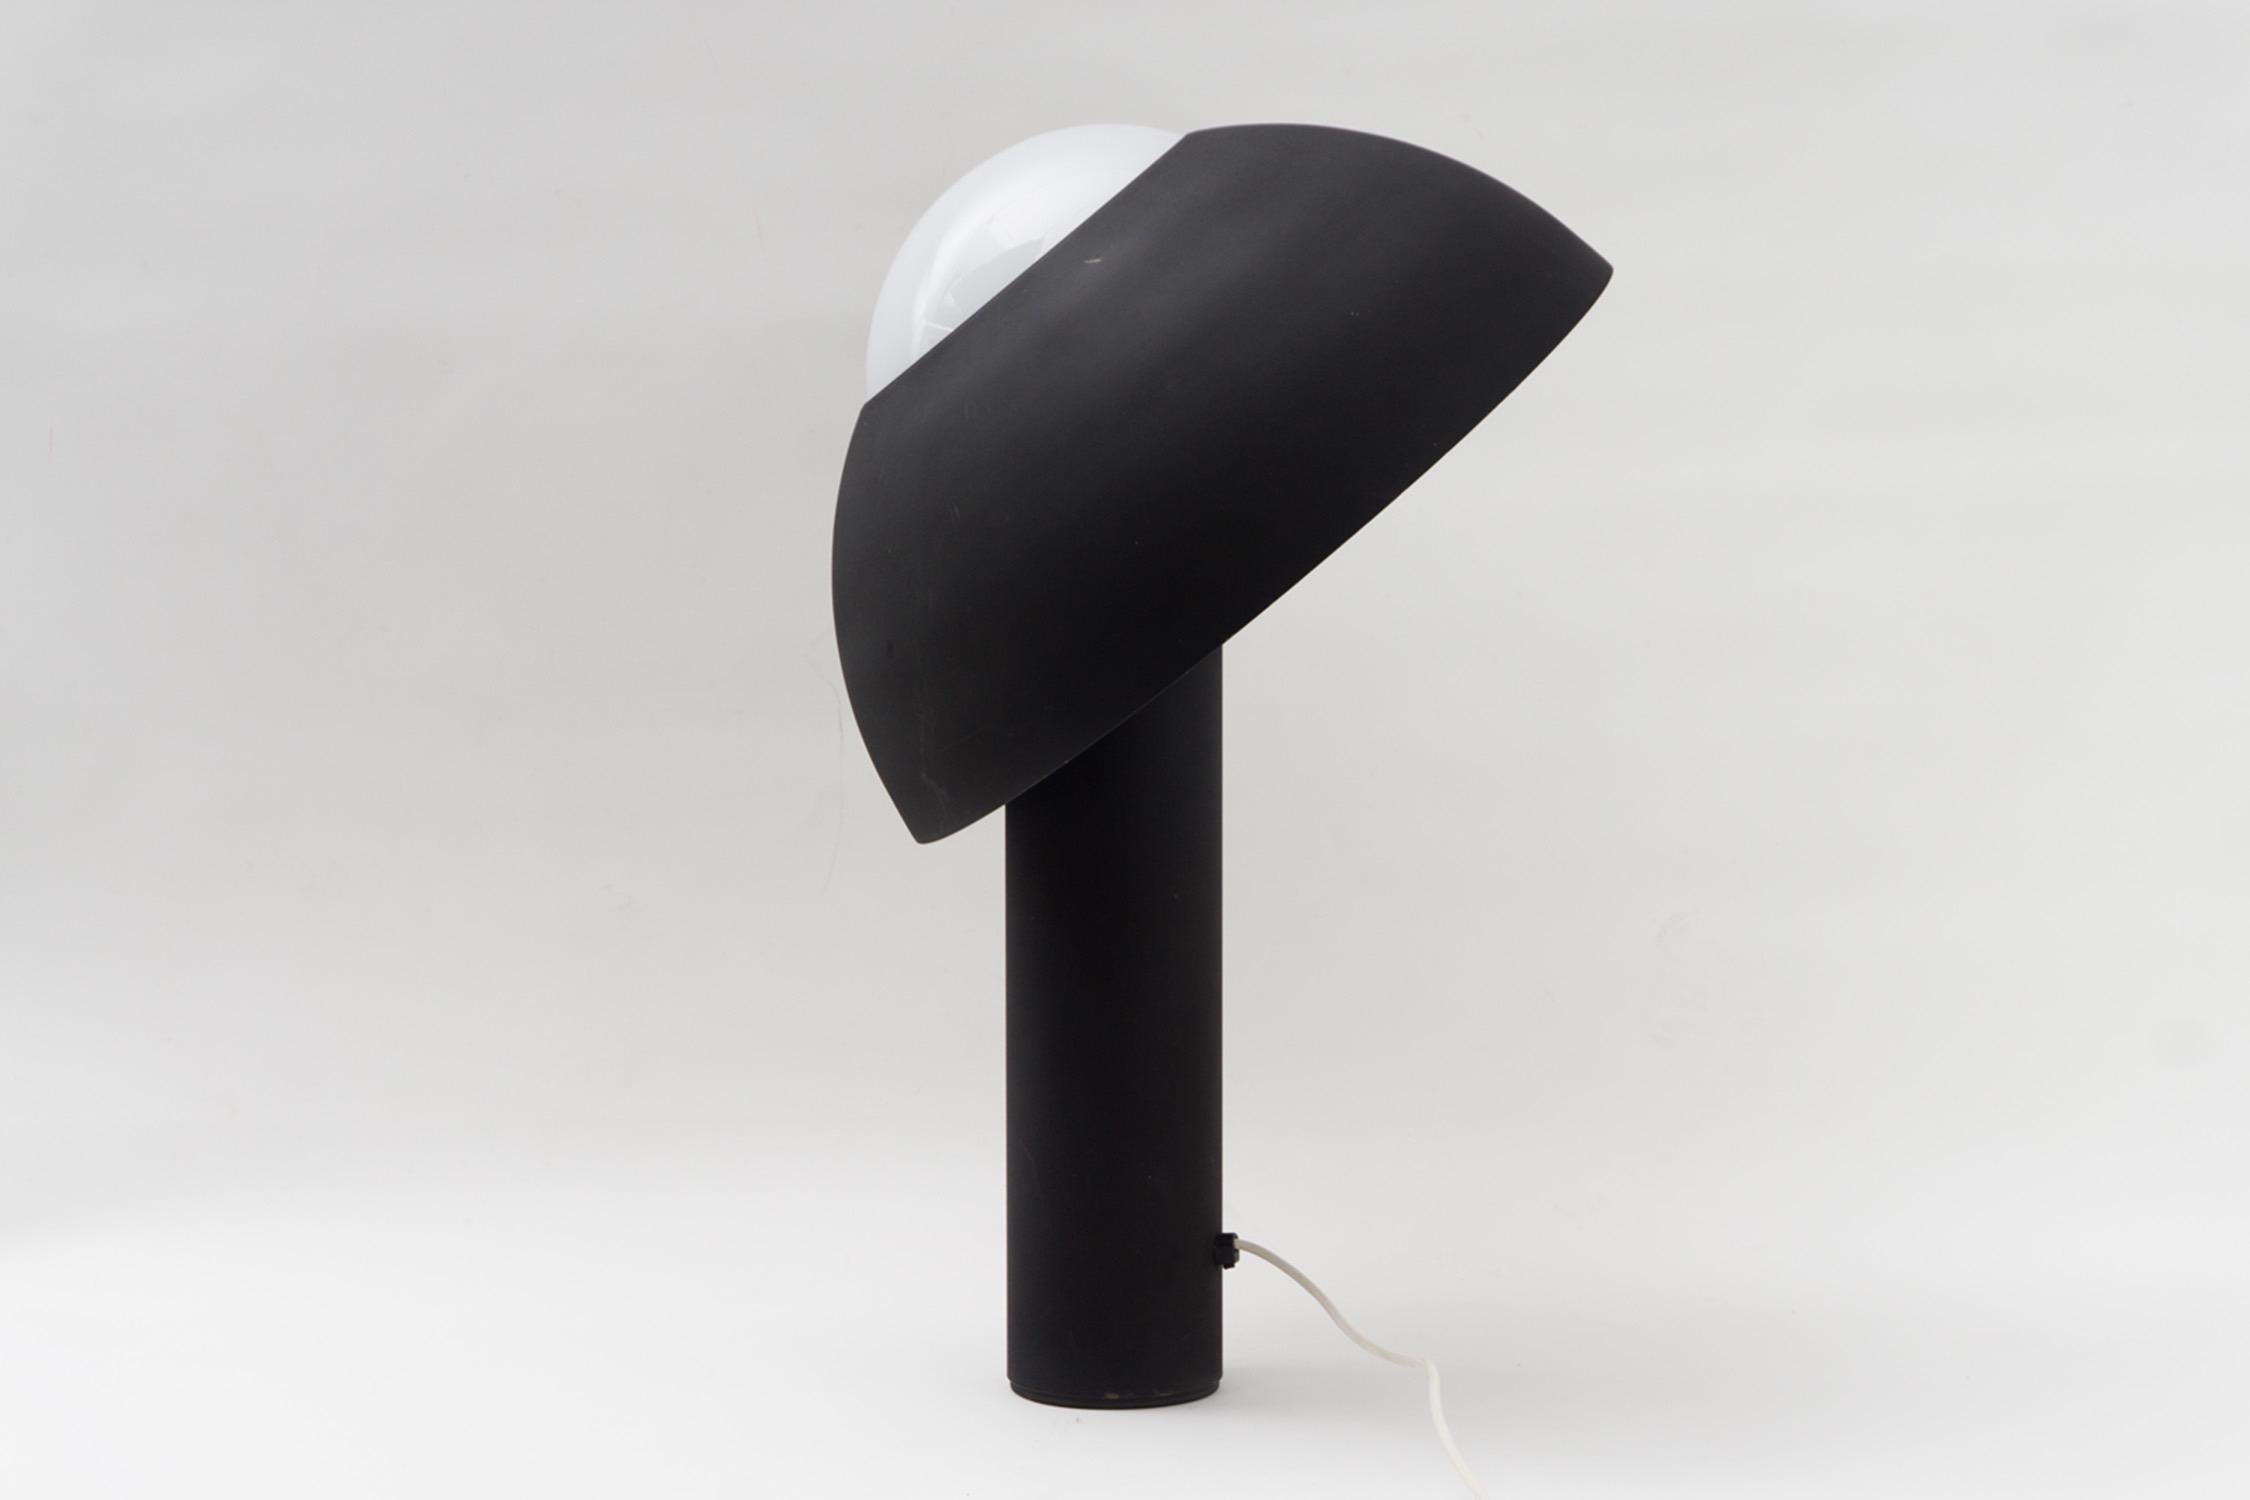 This table lamp made of metal is an extraordinary piece of lighting. It has a solid and playful quality, through it's shade being removable and adjustable in position. Coating in matte black structural lacquer, round lamp made of satined glass.